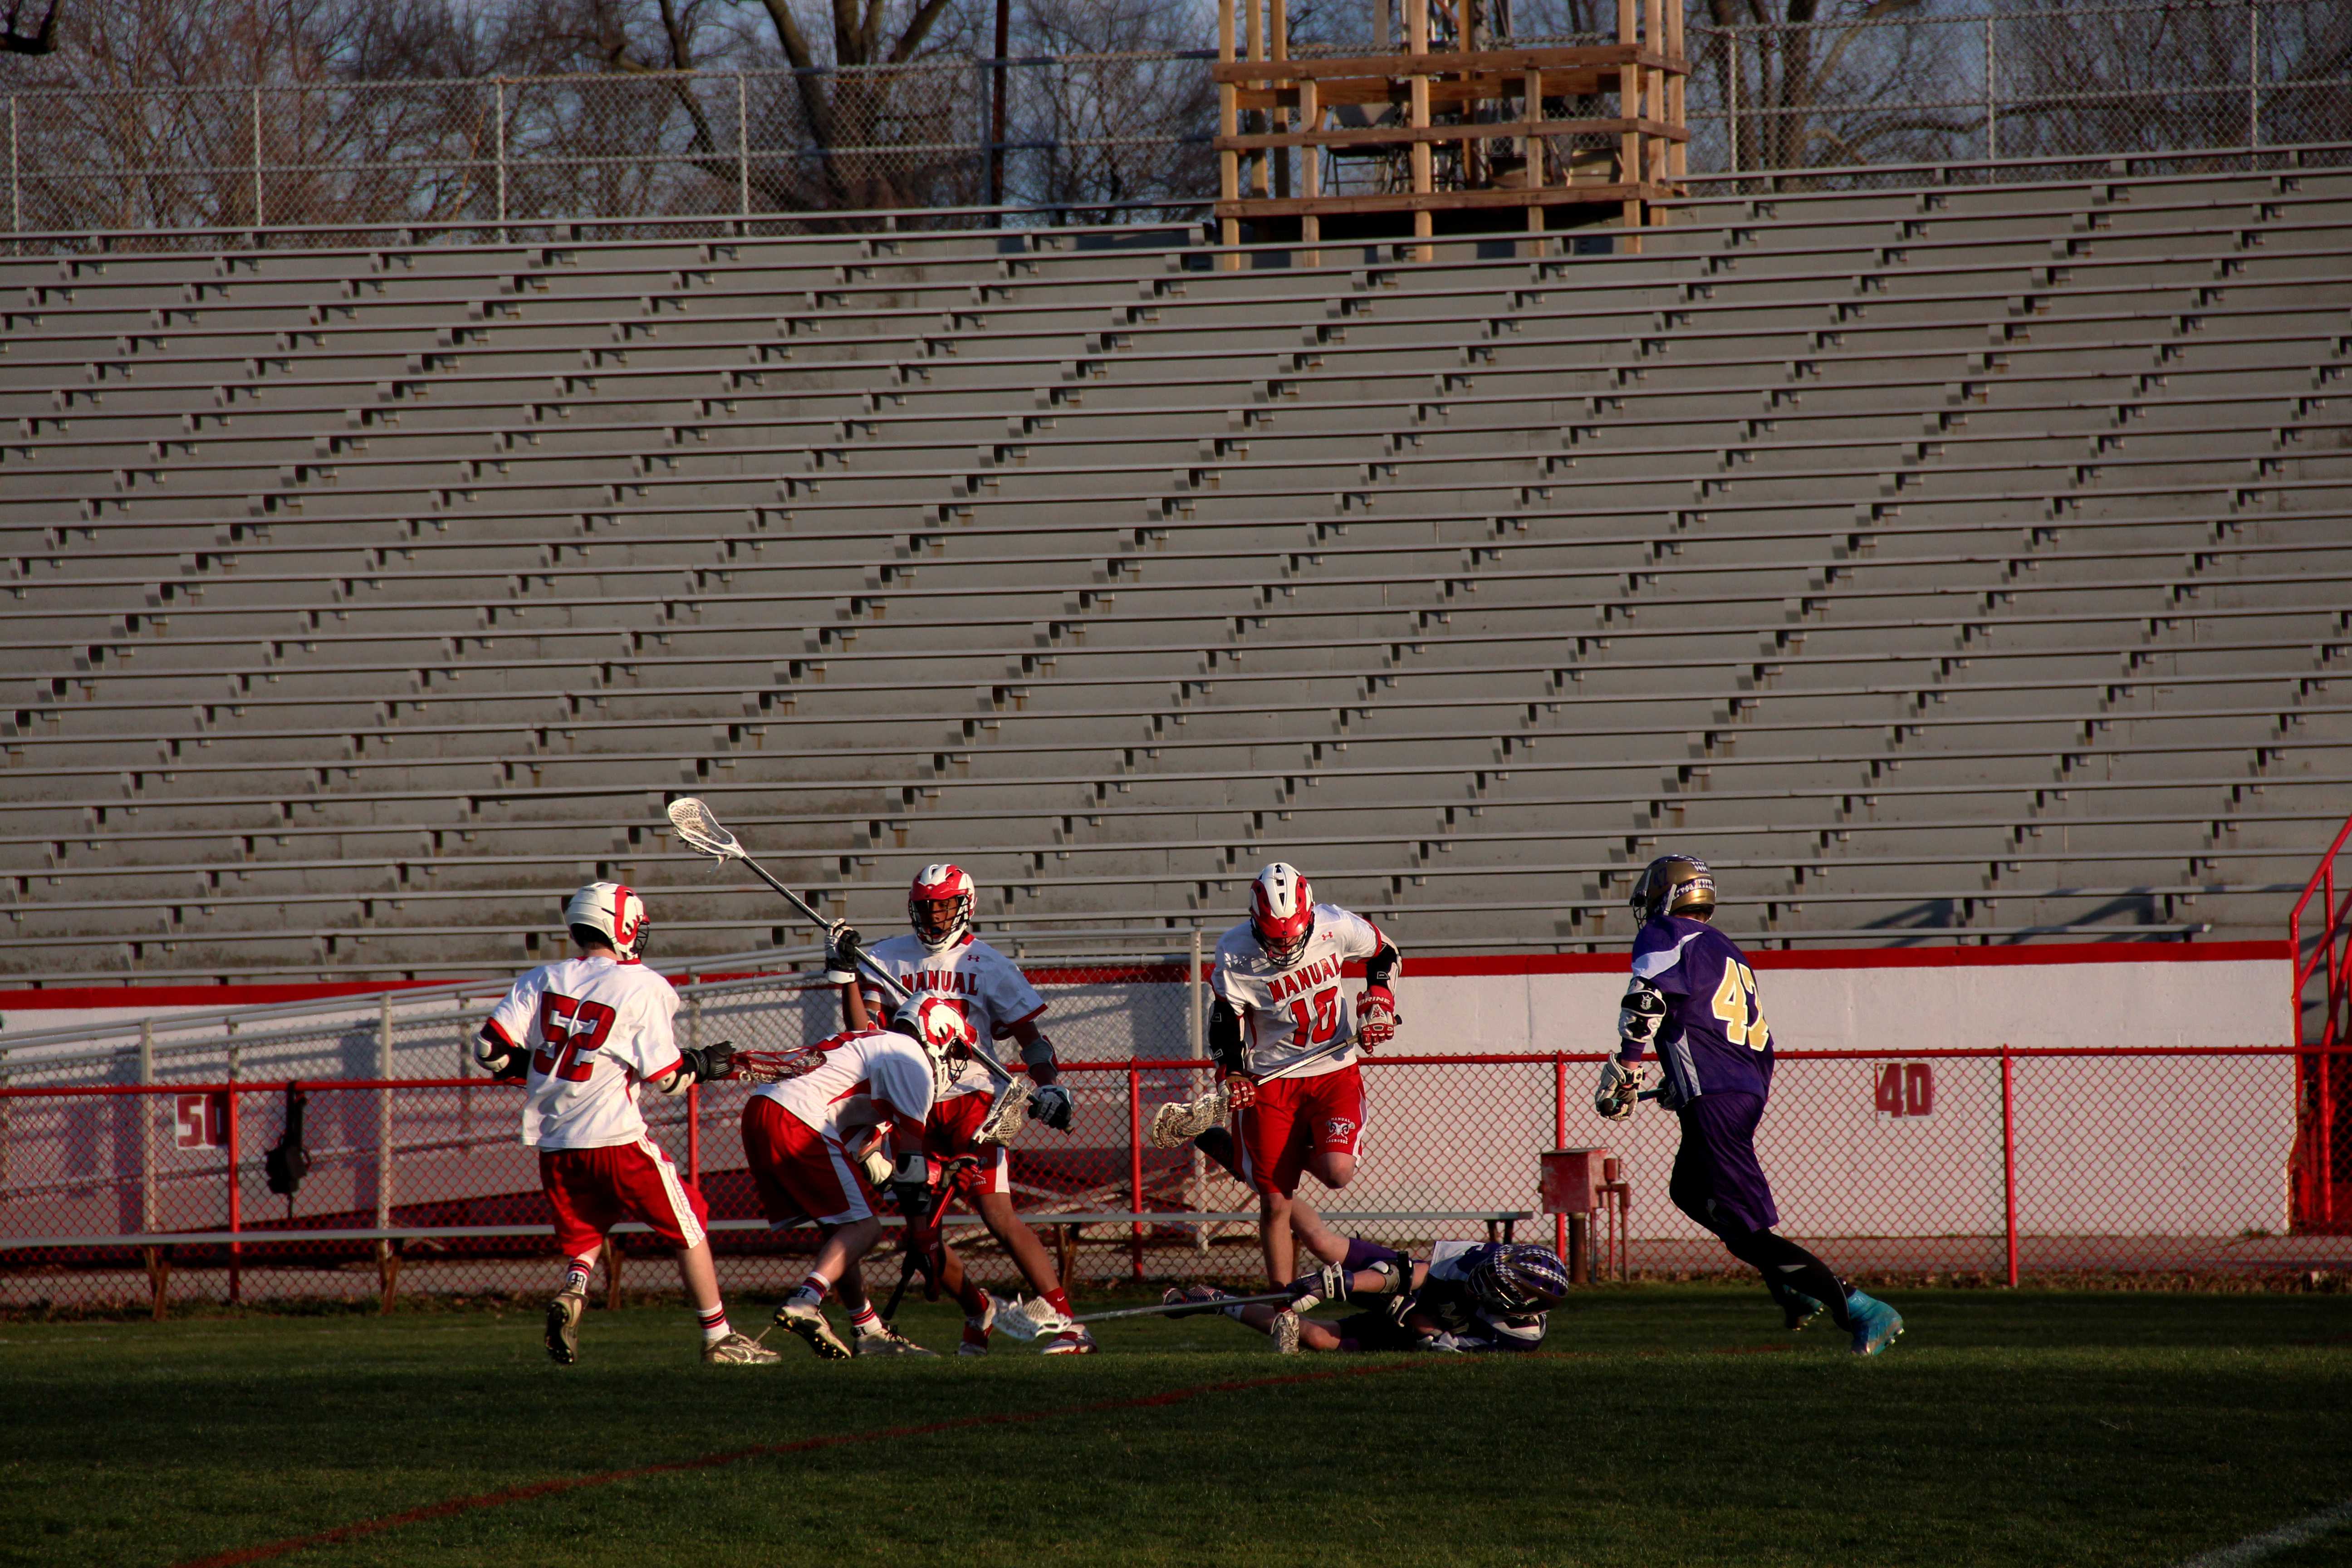 Manuals players battle for the ball as Males player drops the lacrosse ball out of his head.